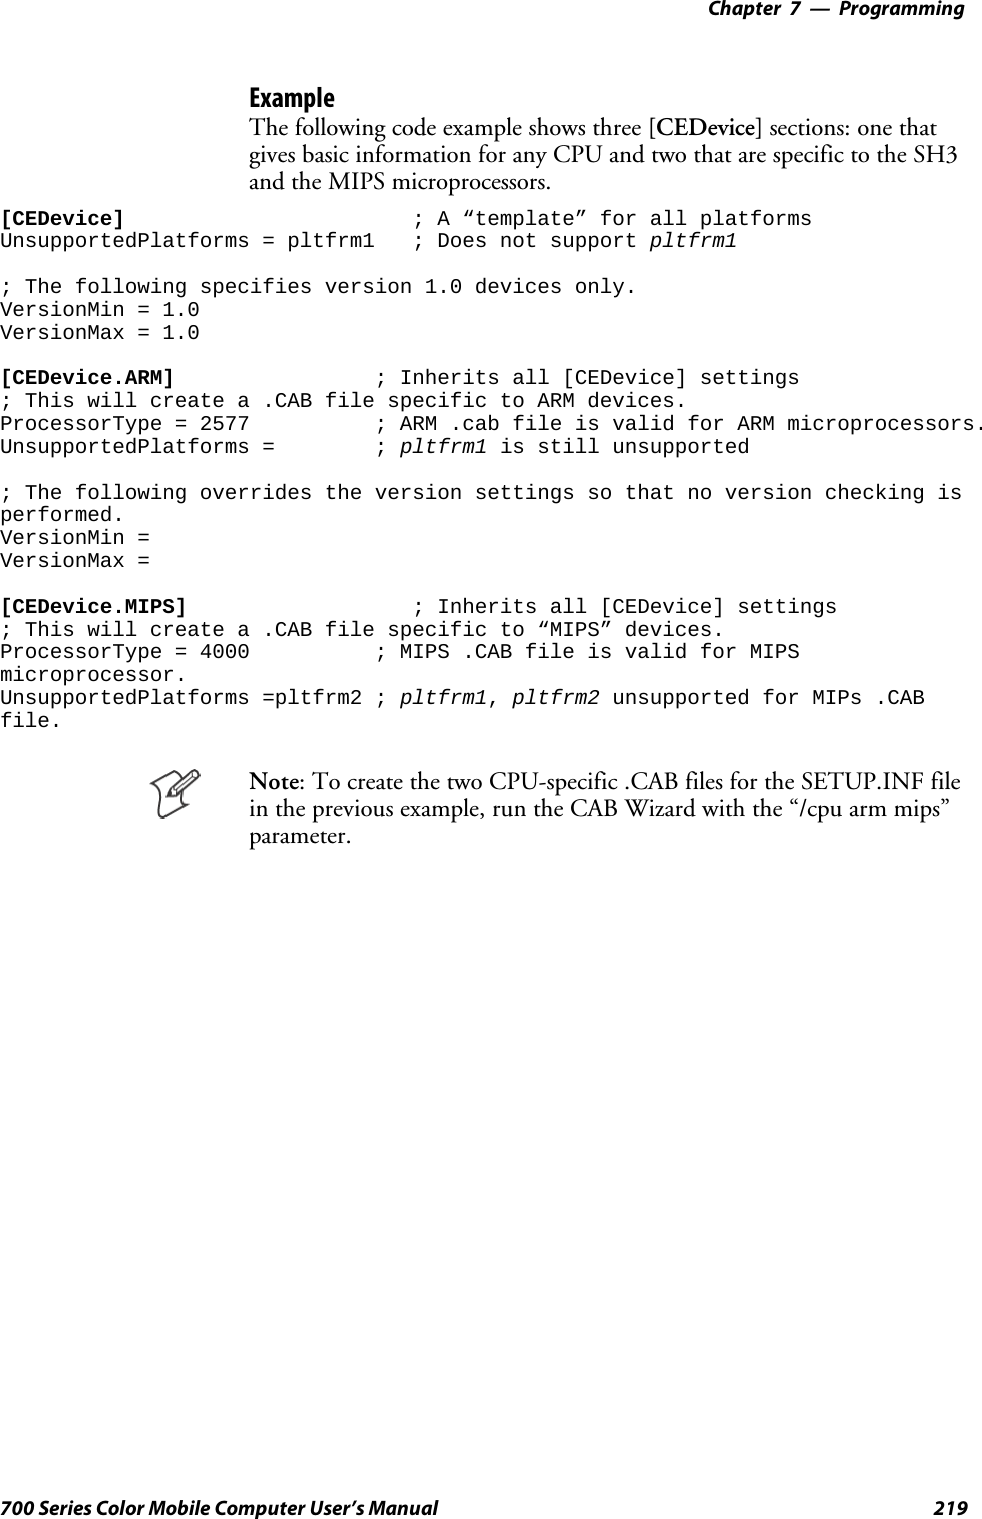 Programming—Chapter 7219700 Series Color Mobile Computer User’s ManualExampleThe following code example shows three [CEDevice] sections: one thatgives basic information for any CPU and two that are specific to the SH3and the MIPS microprocessors.[CEDevice] ; A “template” for all platformsUnsupportedPlatforms = pltfrm1 ; Does not support pltfrm1; The following specifies version 1.0 devices only.VersionMin = 1.0VersionMax = 1.0[CEDevice.ARM] ; Inherits all [CEDevice] settings; This will create a .CAB file specific to ARM devices.ProcessorType = 2577 ; ARM .cab file is valid for ARM microprocessors.UnsupportedPlatforms = ; pltfrm1 is still unsupported; The following overrides the version settings so that no version checking isperformed.VersionMin =VersionMax =[CEDevice.MIPS] ; Inherits all [CEDevice] settings; This will create a .CAB file specific to “MIPS” devices.ProcessorType = 4000 ; MIPS .CAB file is valid for MIPSmicroprocessor.UnsupportedPlatforms =pltfrm2 ; pltfrm1,pltfrm2 unsupported for MIPs .CABfile.Note:TocreatethetwoCPU-specific.CABfilesfortheSETUP.INFfilein the previous example, run the CAB Wizard with the “/cpu arm mips”parameter.